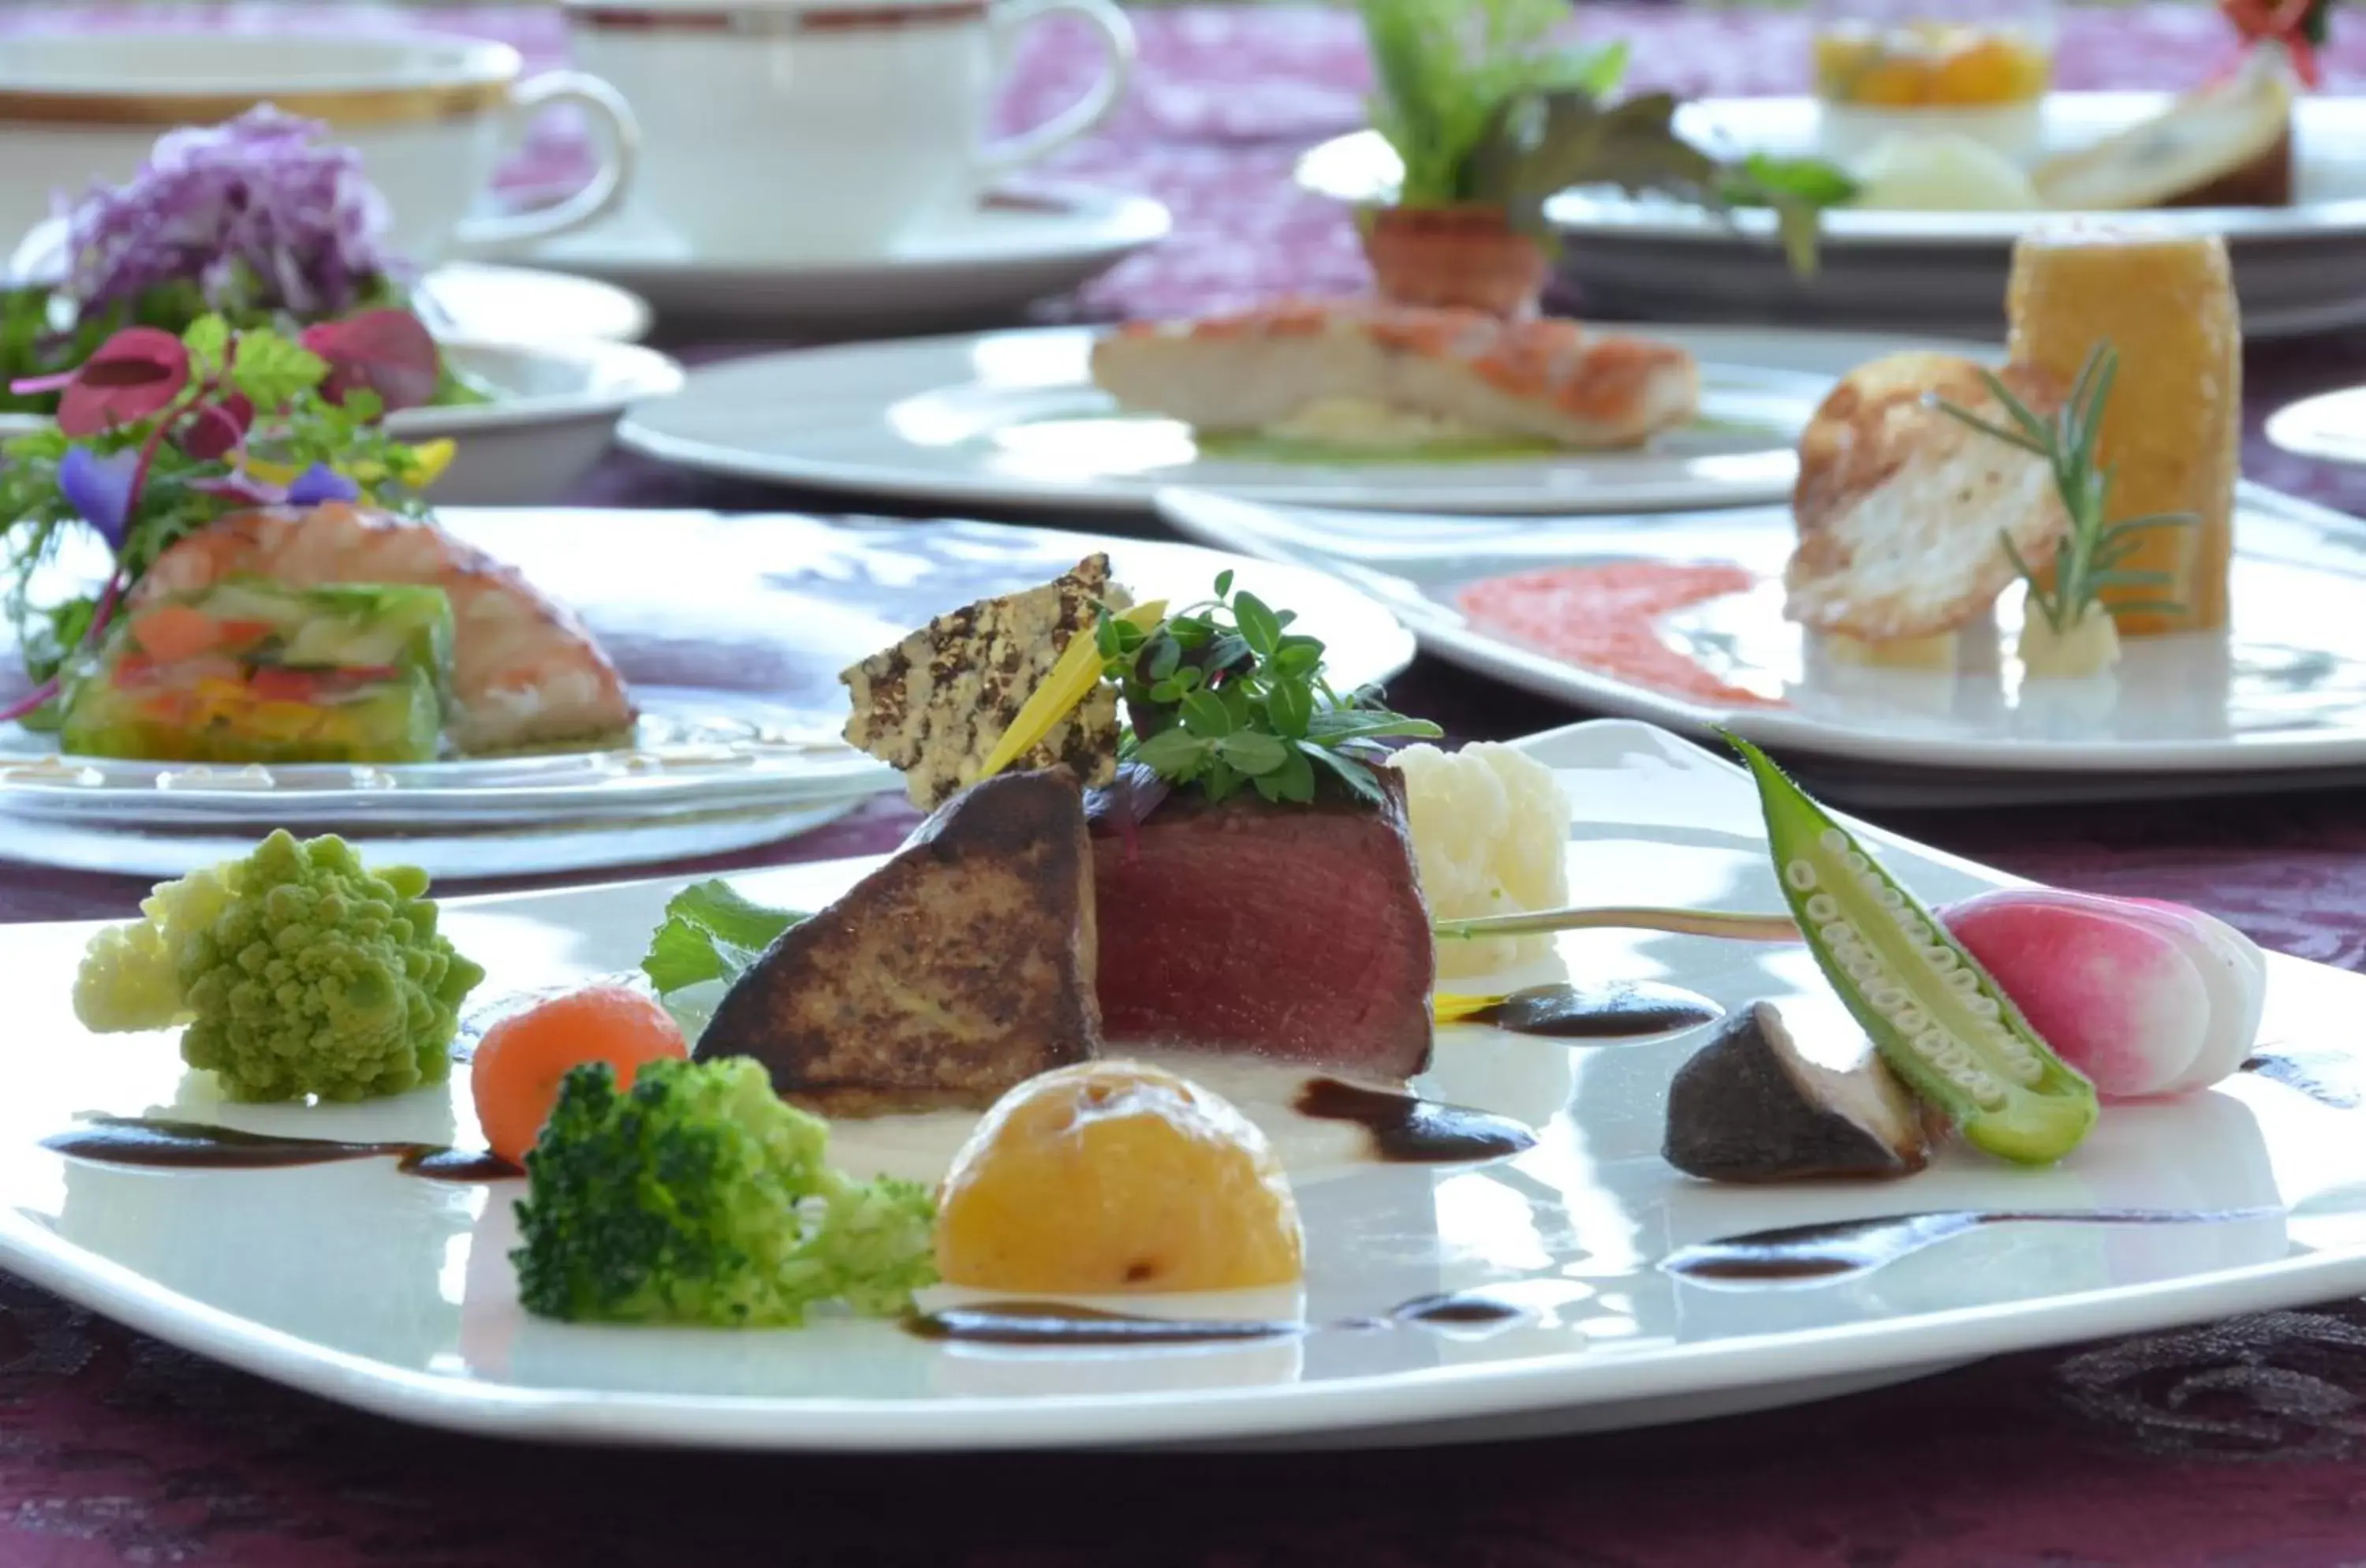 Food close-up in Hotel Kyocera